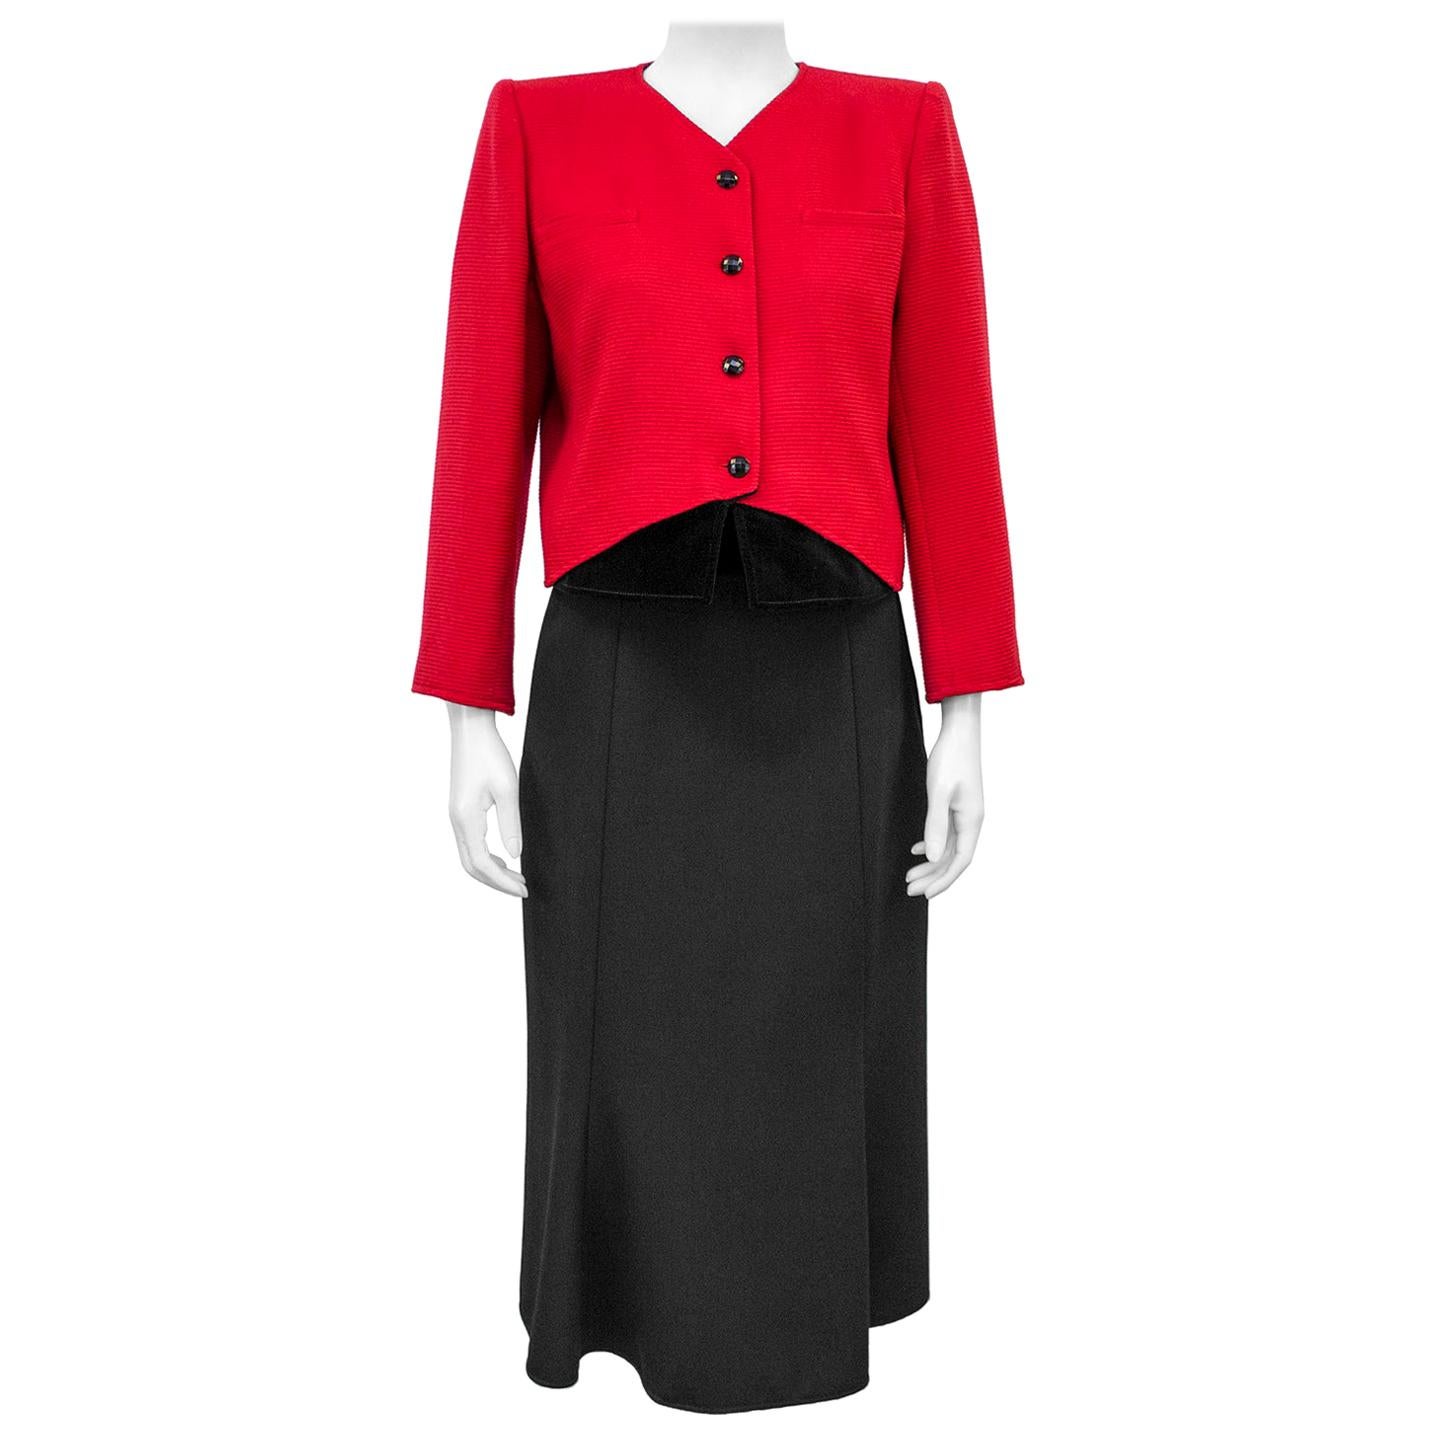 1980s Valentino Midi Skirt Suit with Red Jacket and Velvet Details